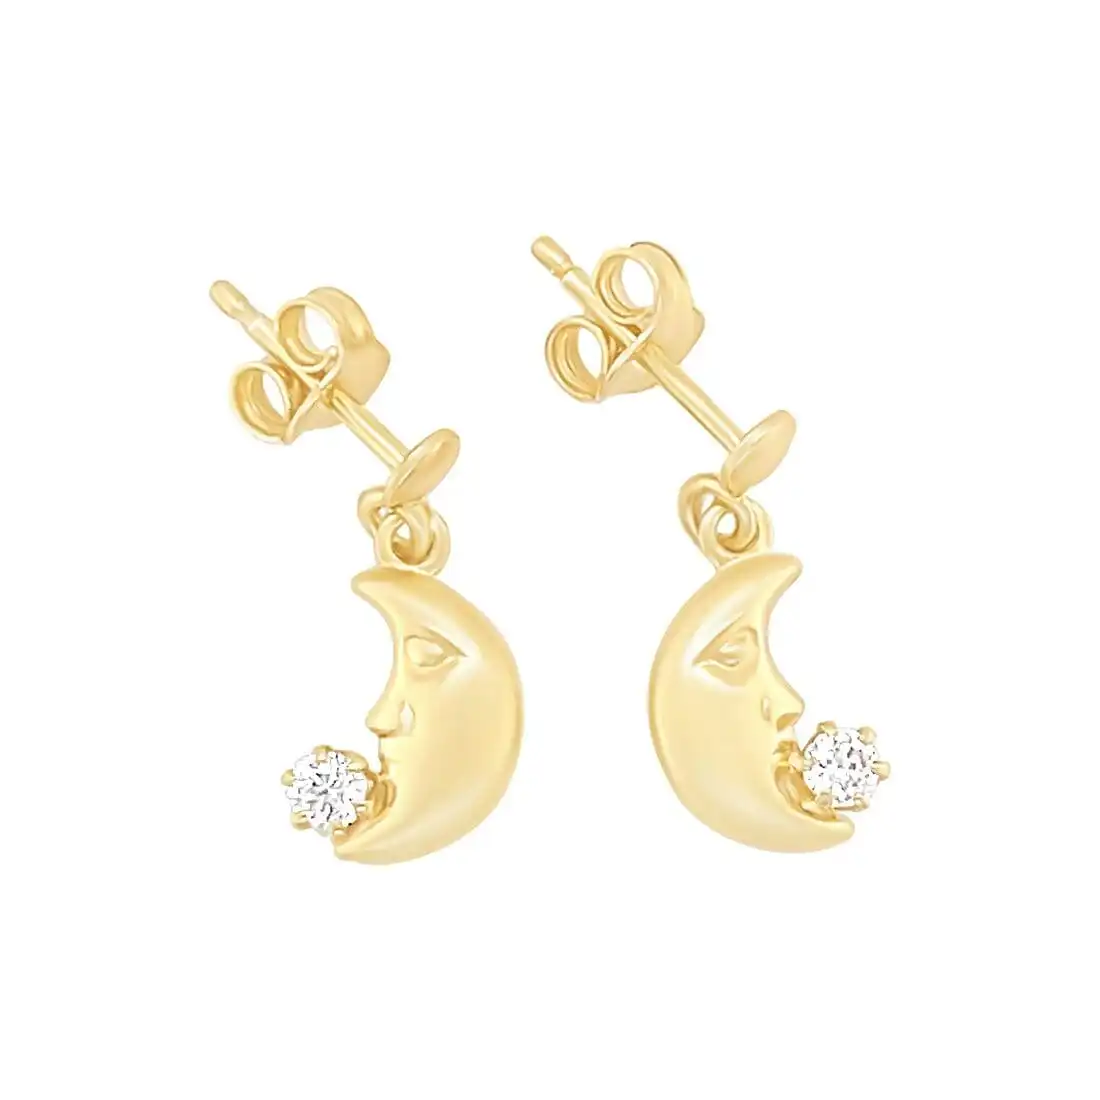 Children's Moon Drop Earrings with Cubic Zirconia Stud in 9ct Yellow Gold Silver Infused